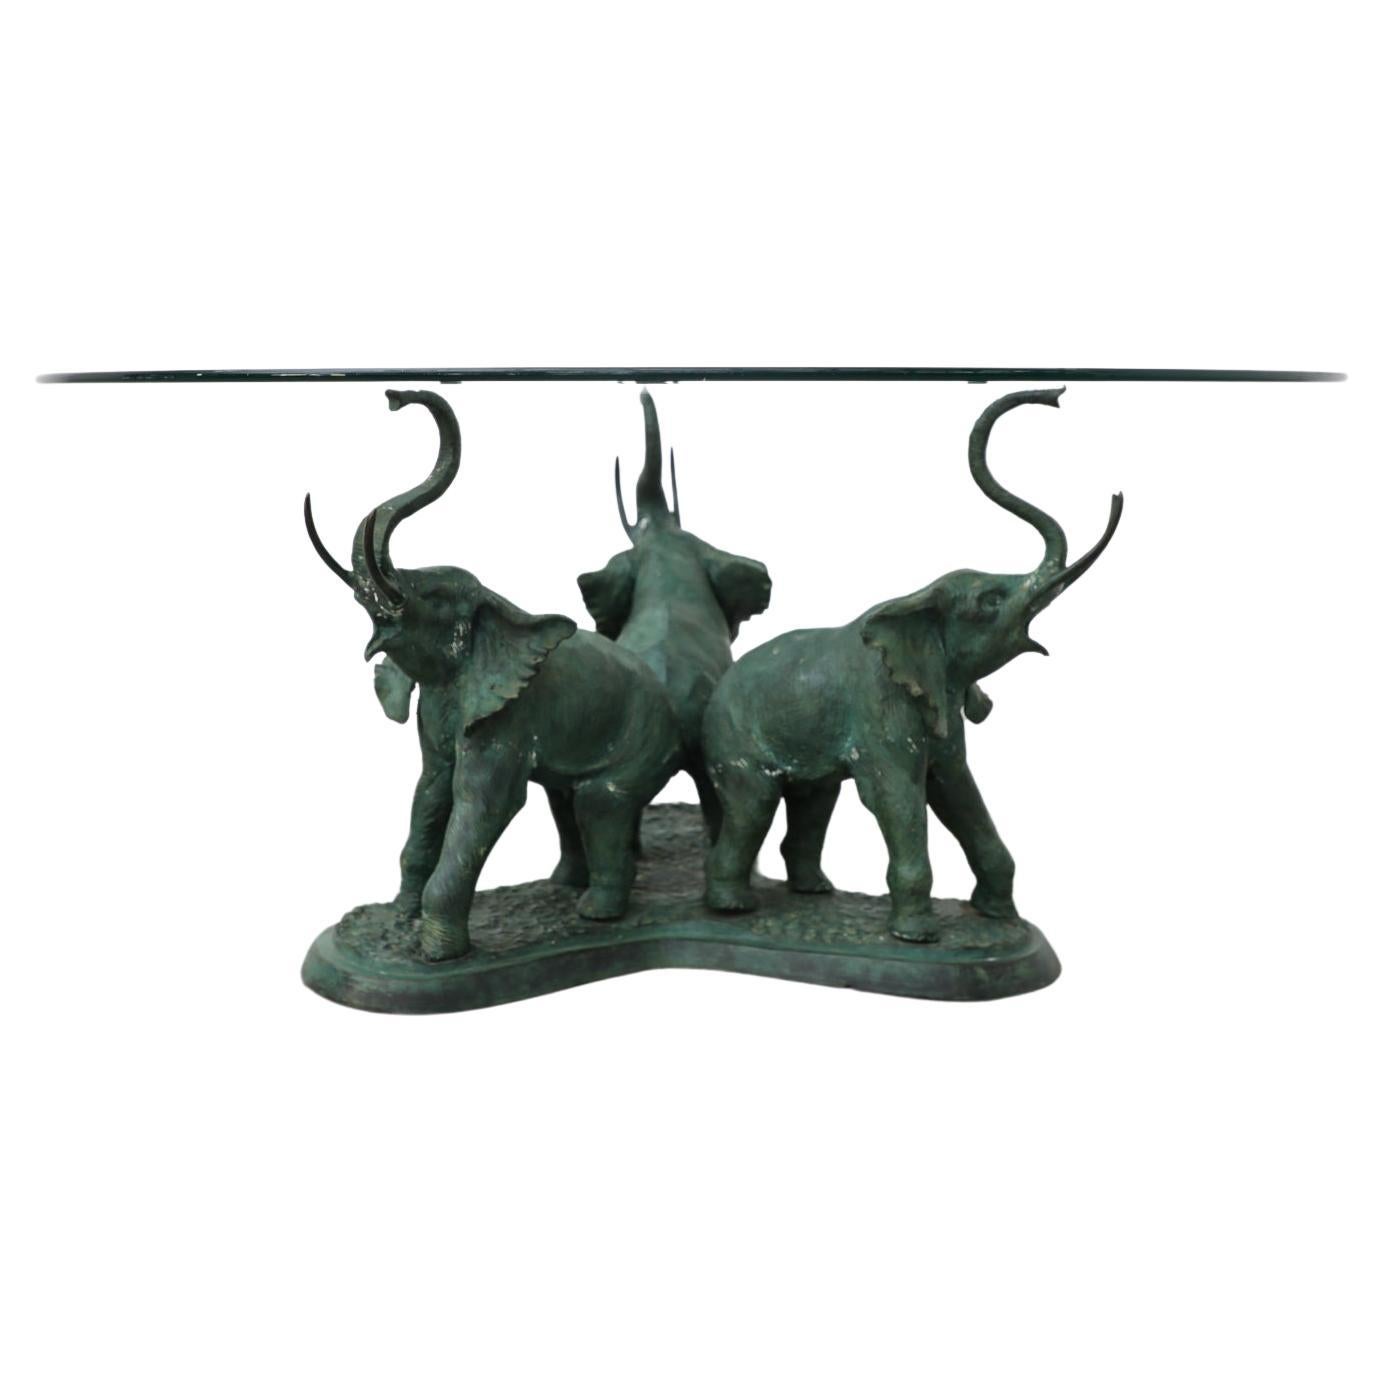 Belgian Sculptural Bronze and Glass Salon Table w/ Trio of Elephants Base, 1970s For Sale